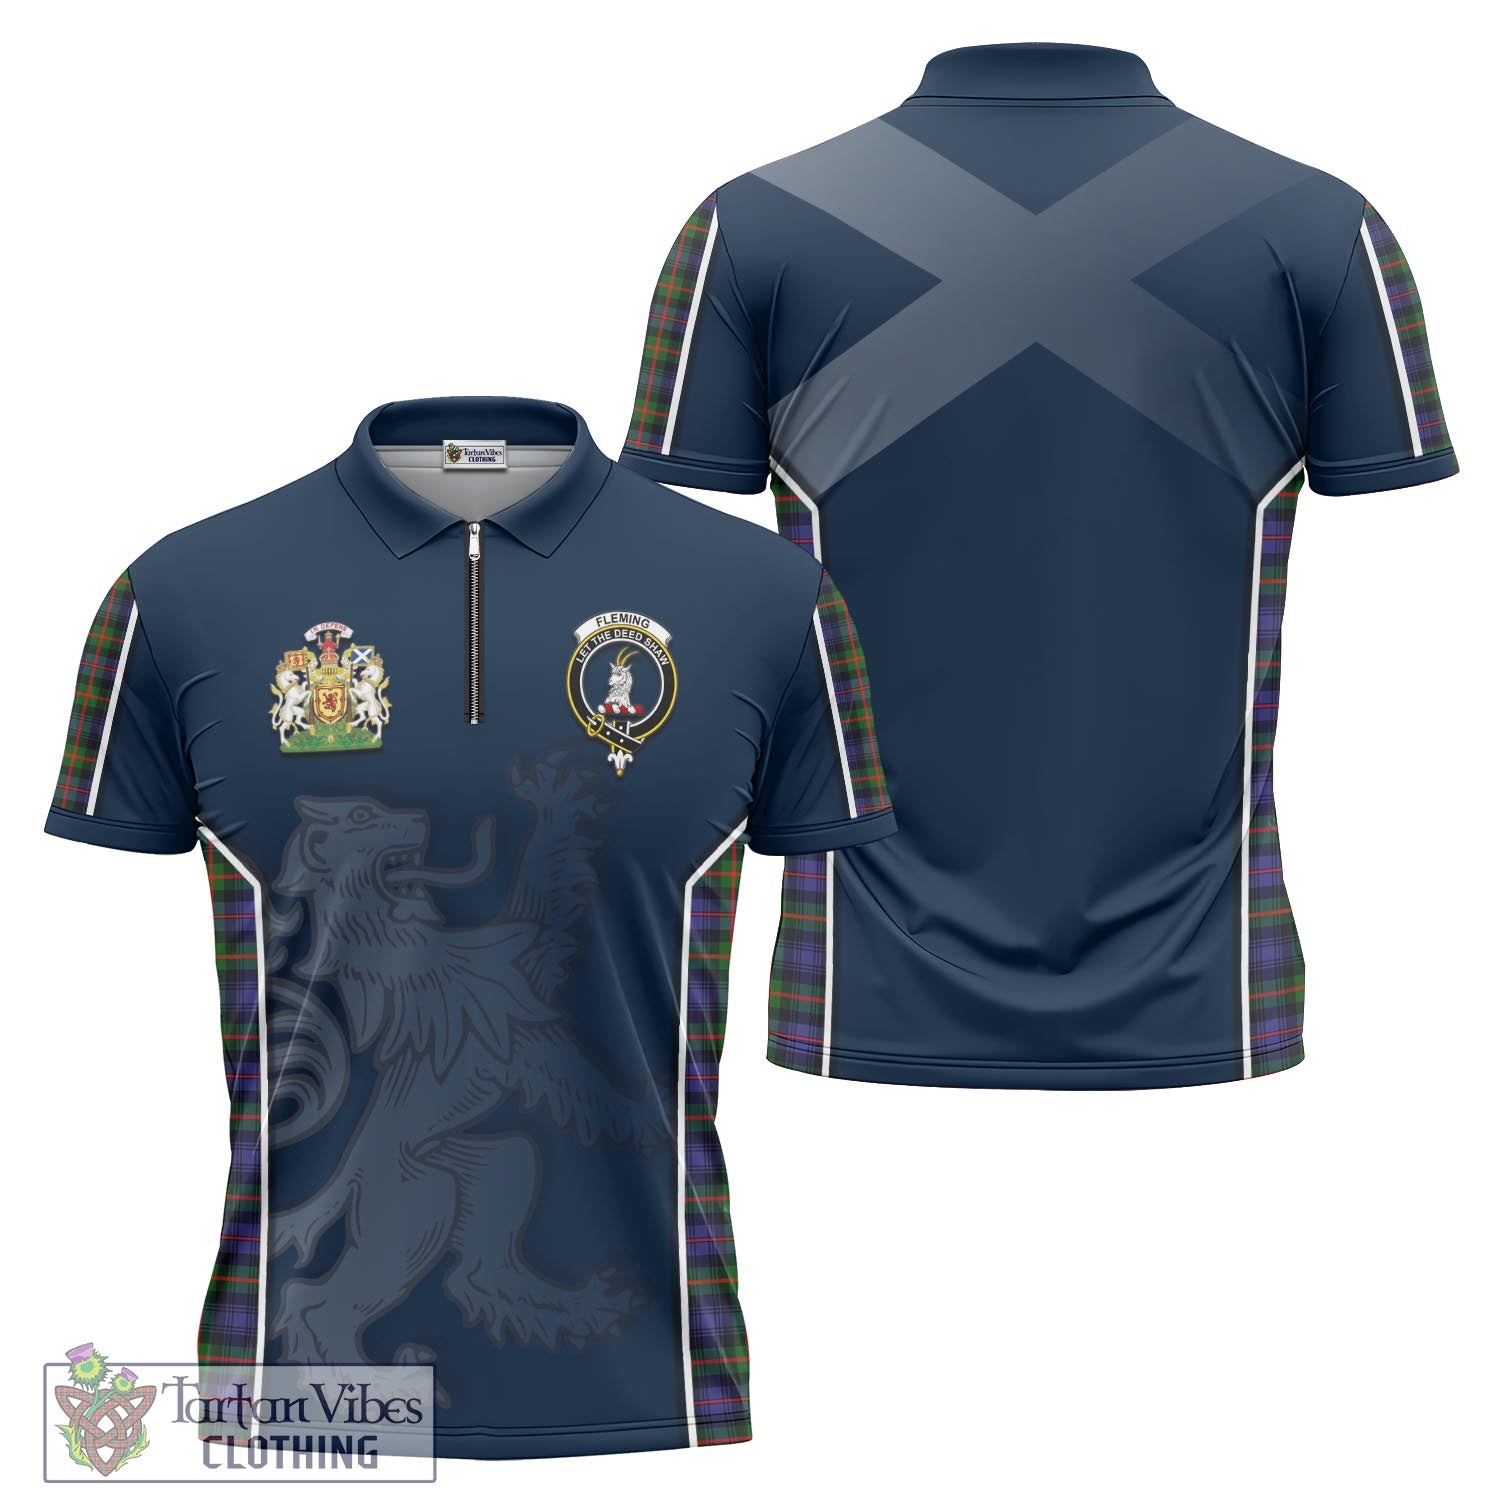 Tartan Vibes Clothing Fleming Tartan Zipper Polo Shirt with Family Crest and Lion Rampant Vibes Sport Style